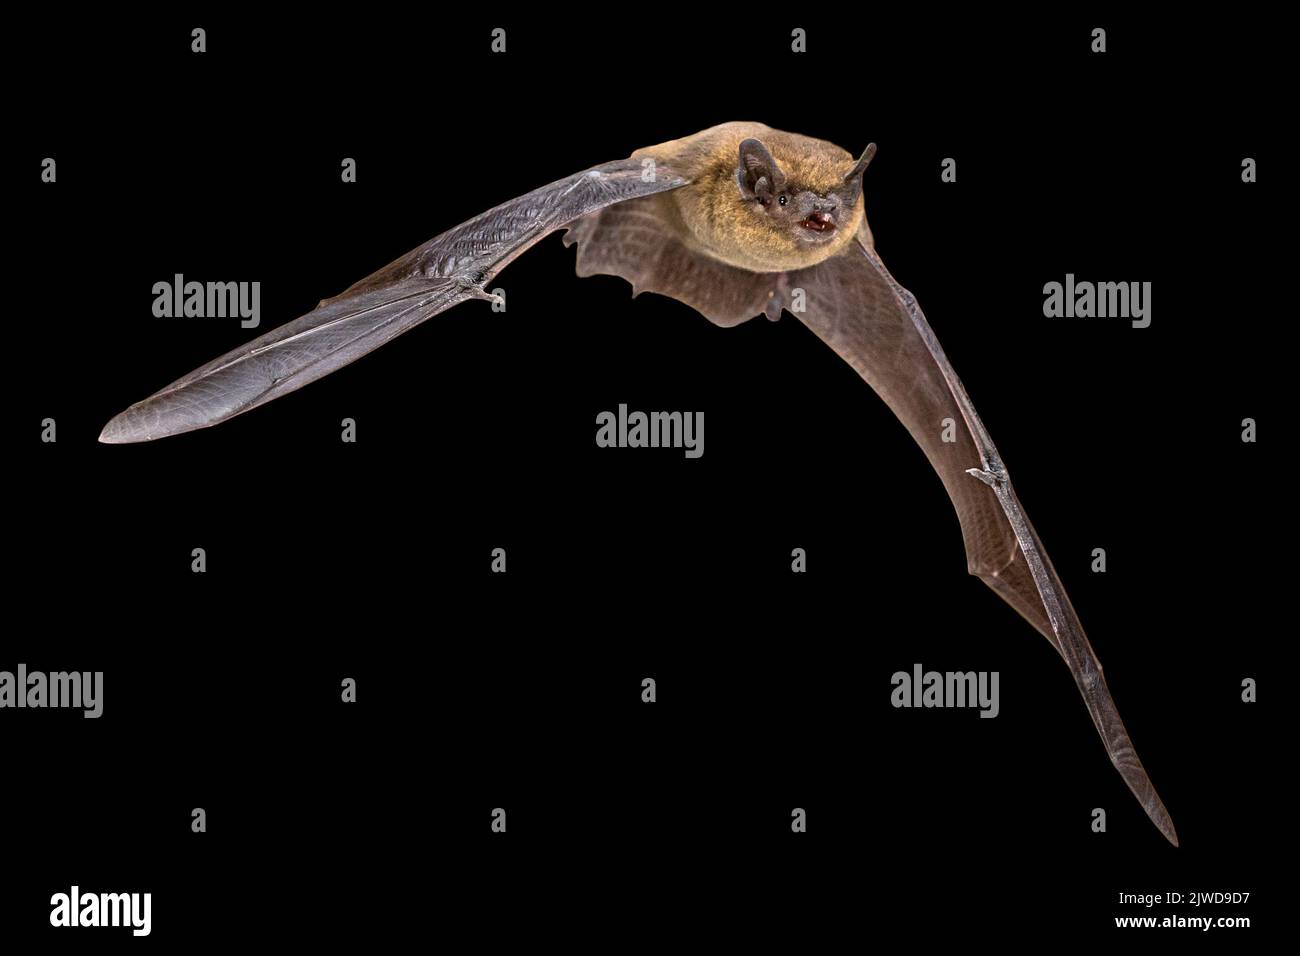 Flying Pipistrelle bat (Pipistrellus pipistrellus) action shot of hunting animal isolated on black background. This species is know for roosting and l Stock Photo